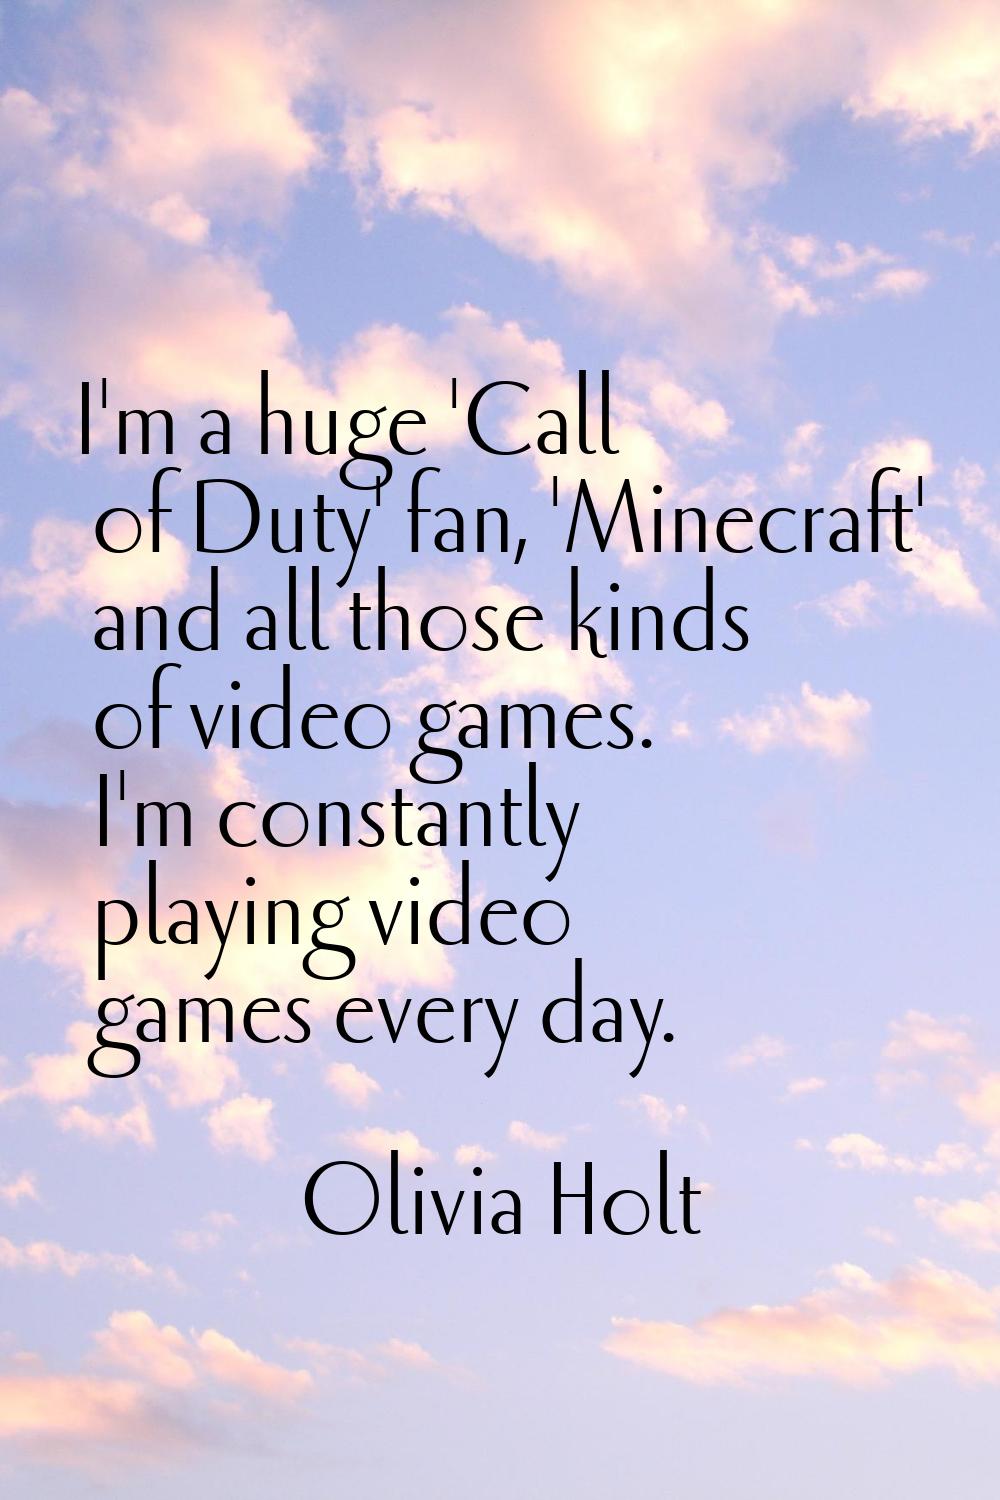 I'm a huge 'Call of Duty' fan, 'Minecraft' and all those kinds of video games. I'm constantly playi